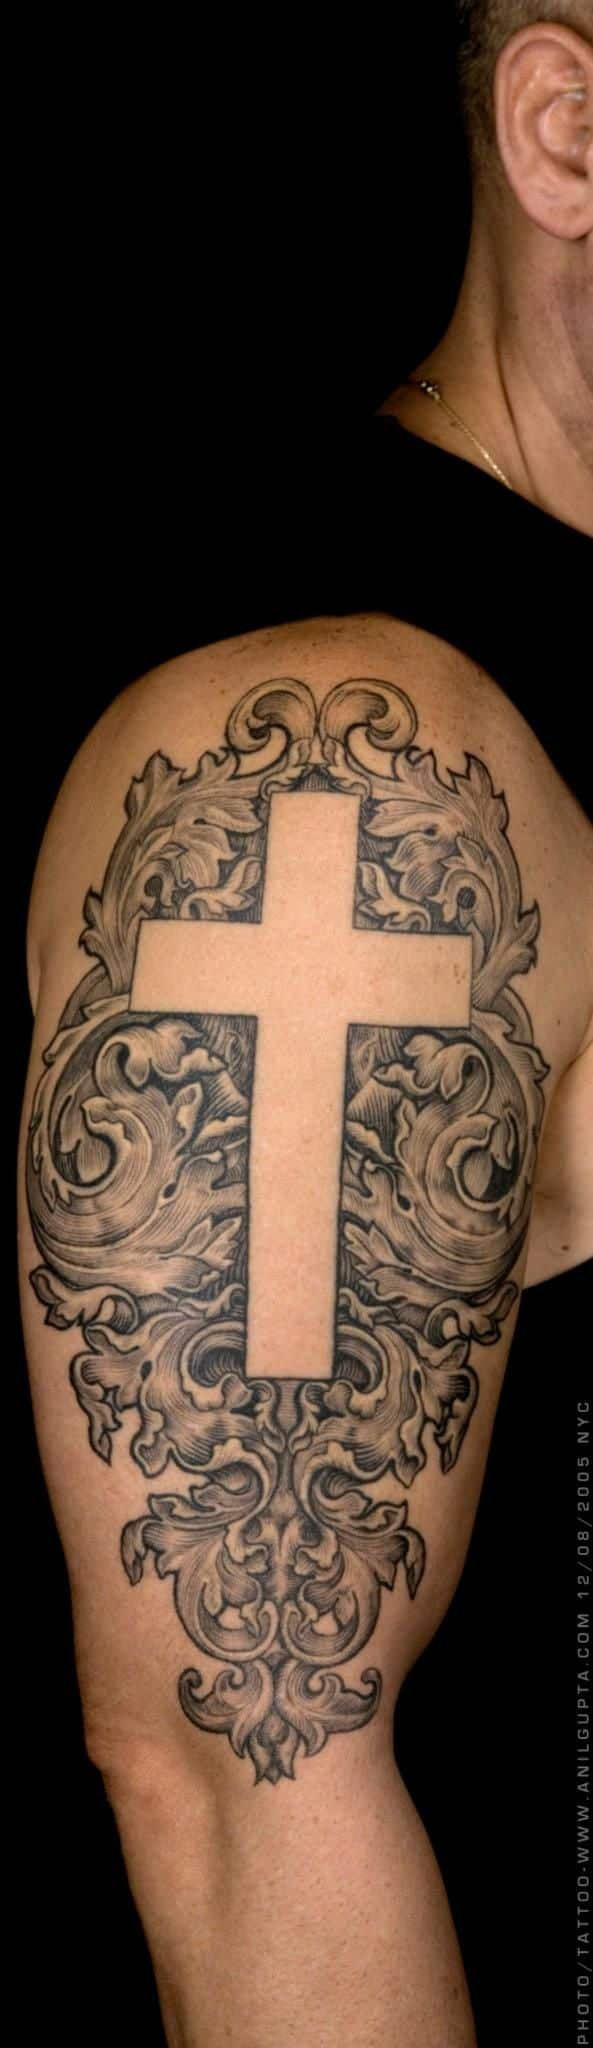 Cross Tattoos For Guys Tattoo Ideas And Designs For Men pertaining to sizing 593 X 2048